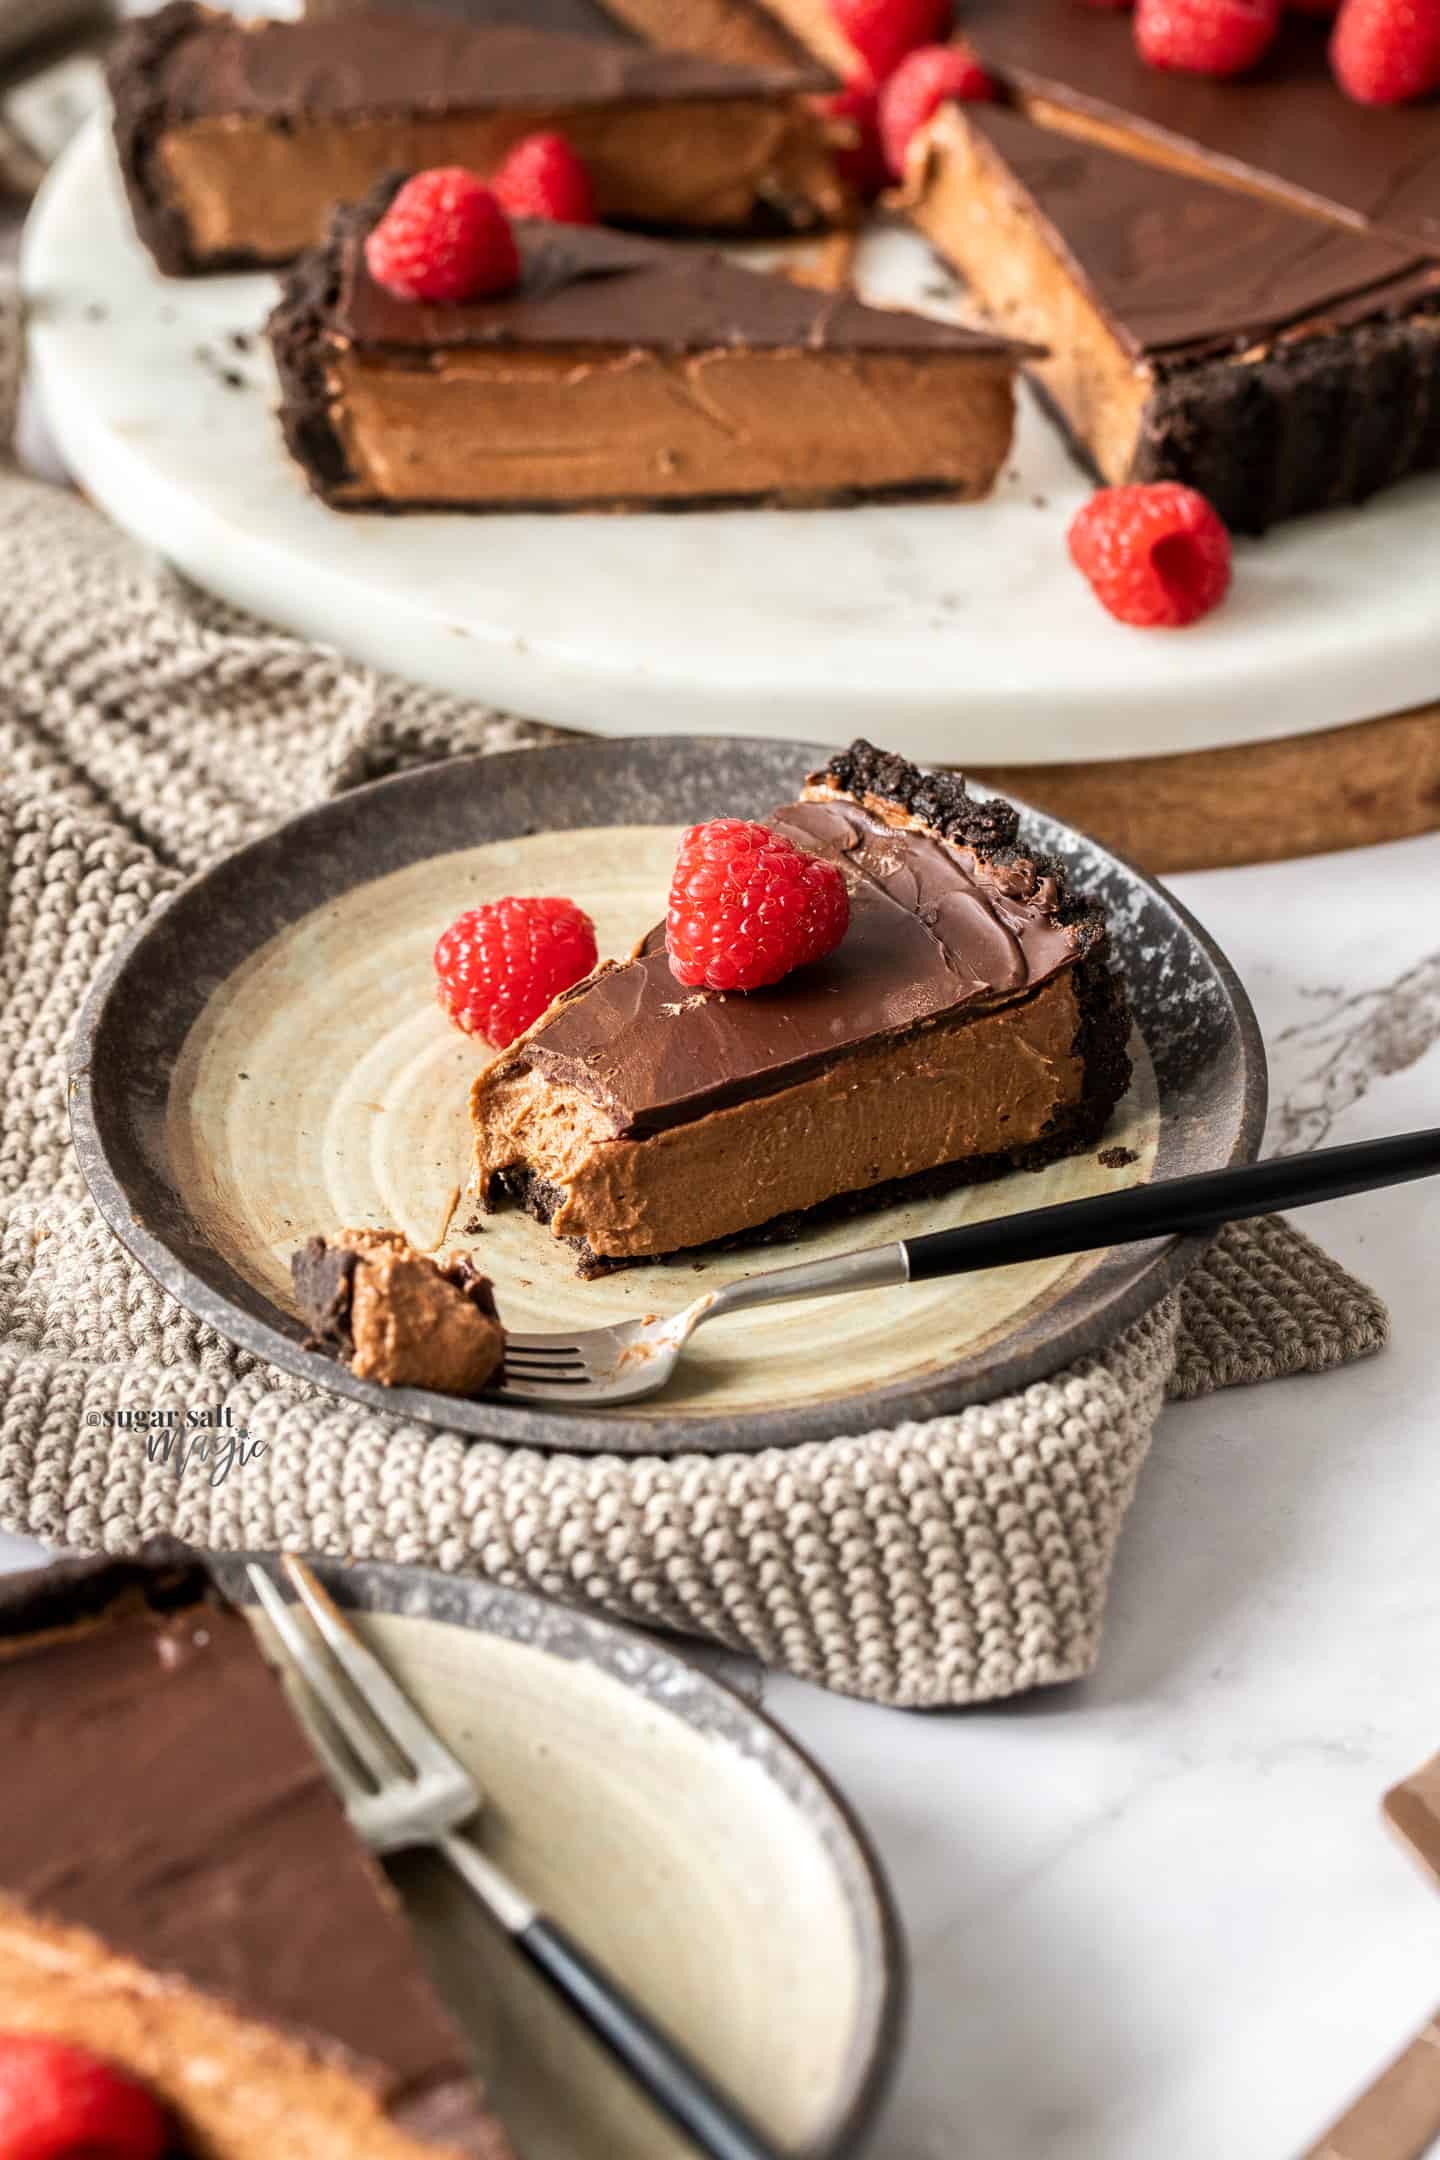 A slice of chocolate mousse tart on a brown cake plate with a bite taken out.